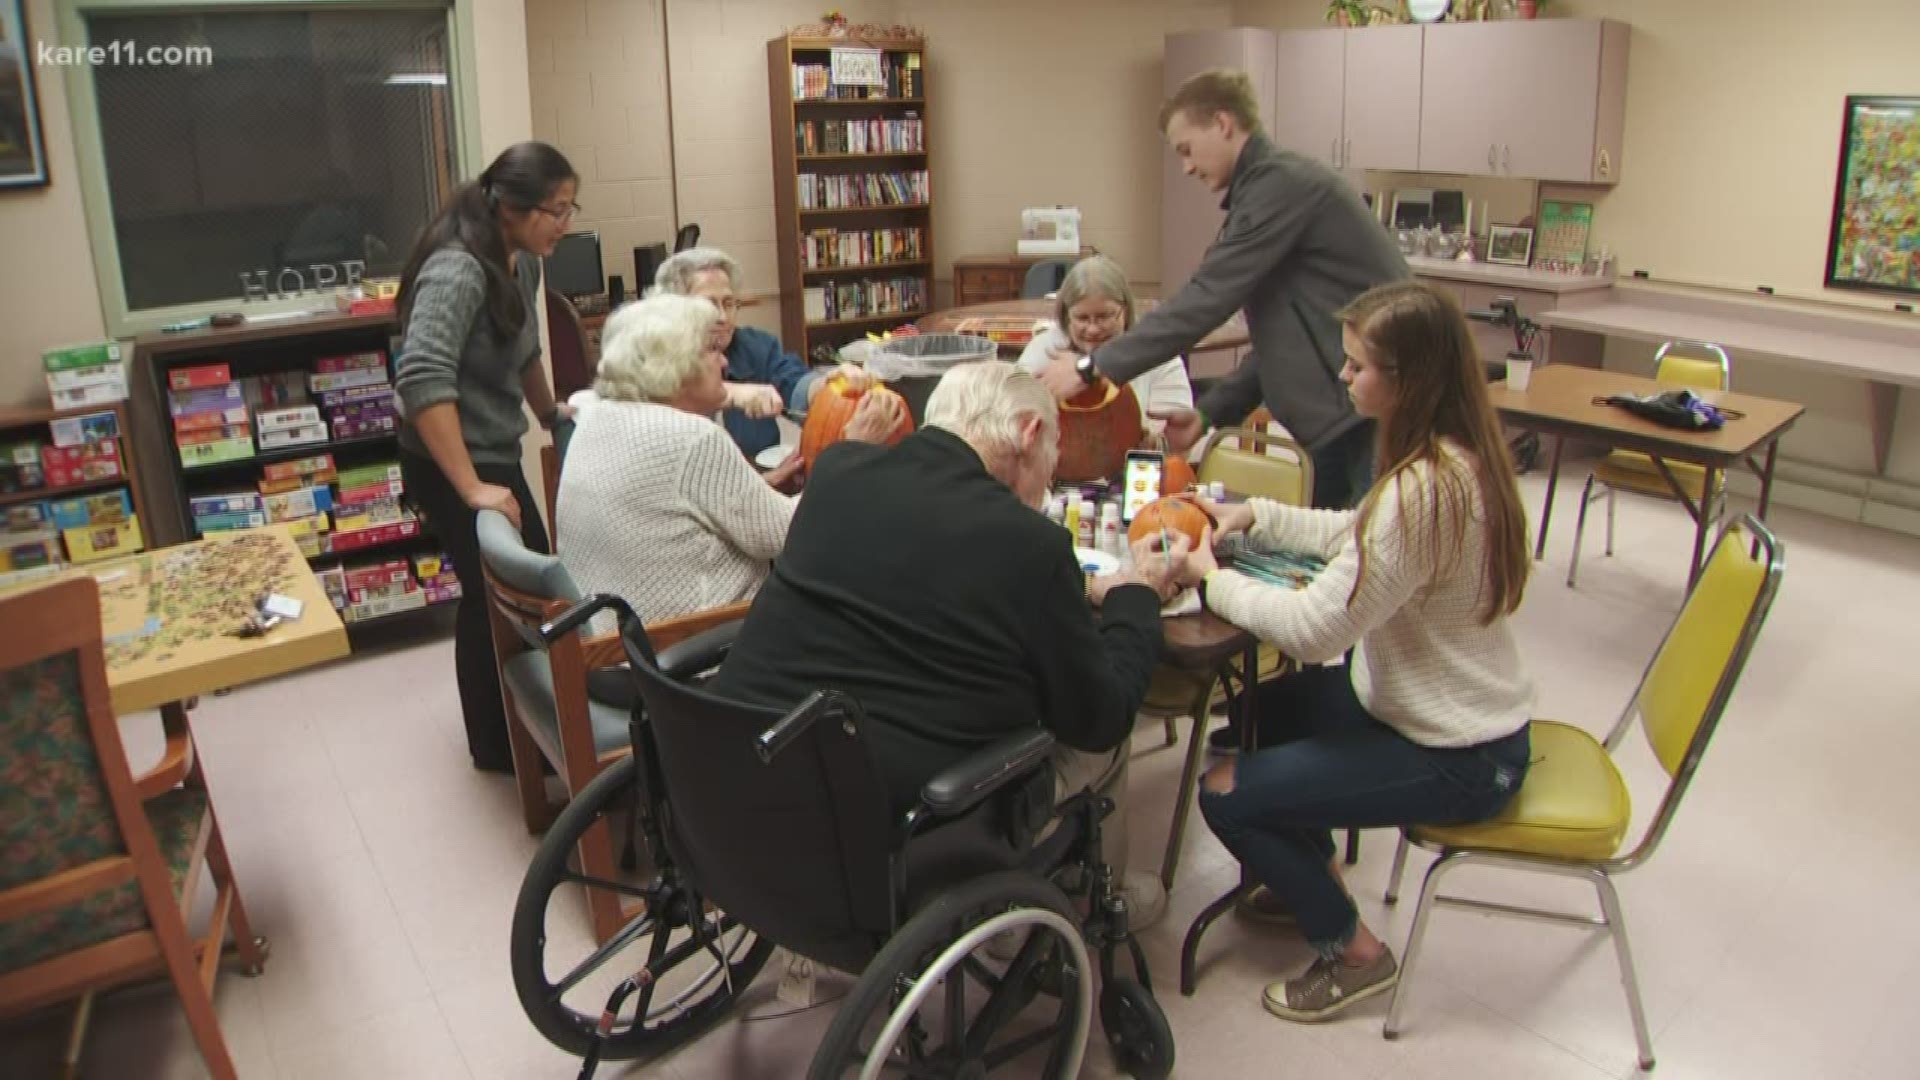 A Winona senior home is now also home to six college students.